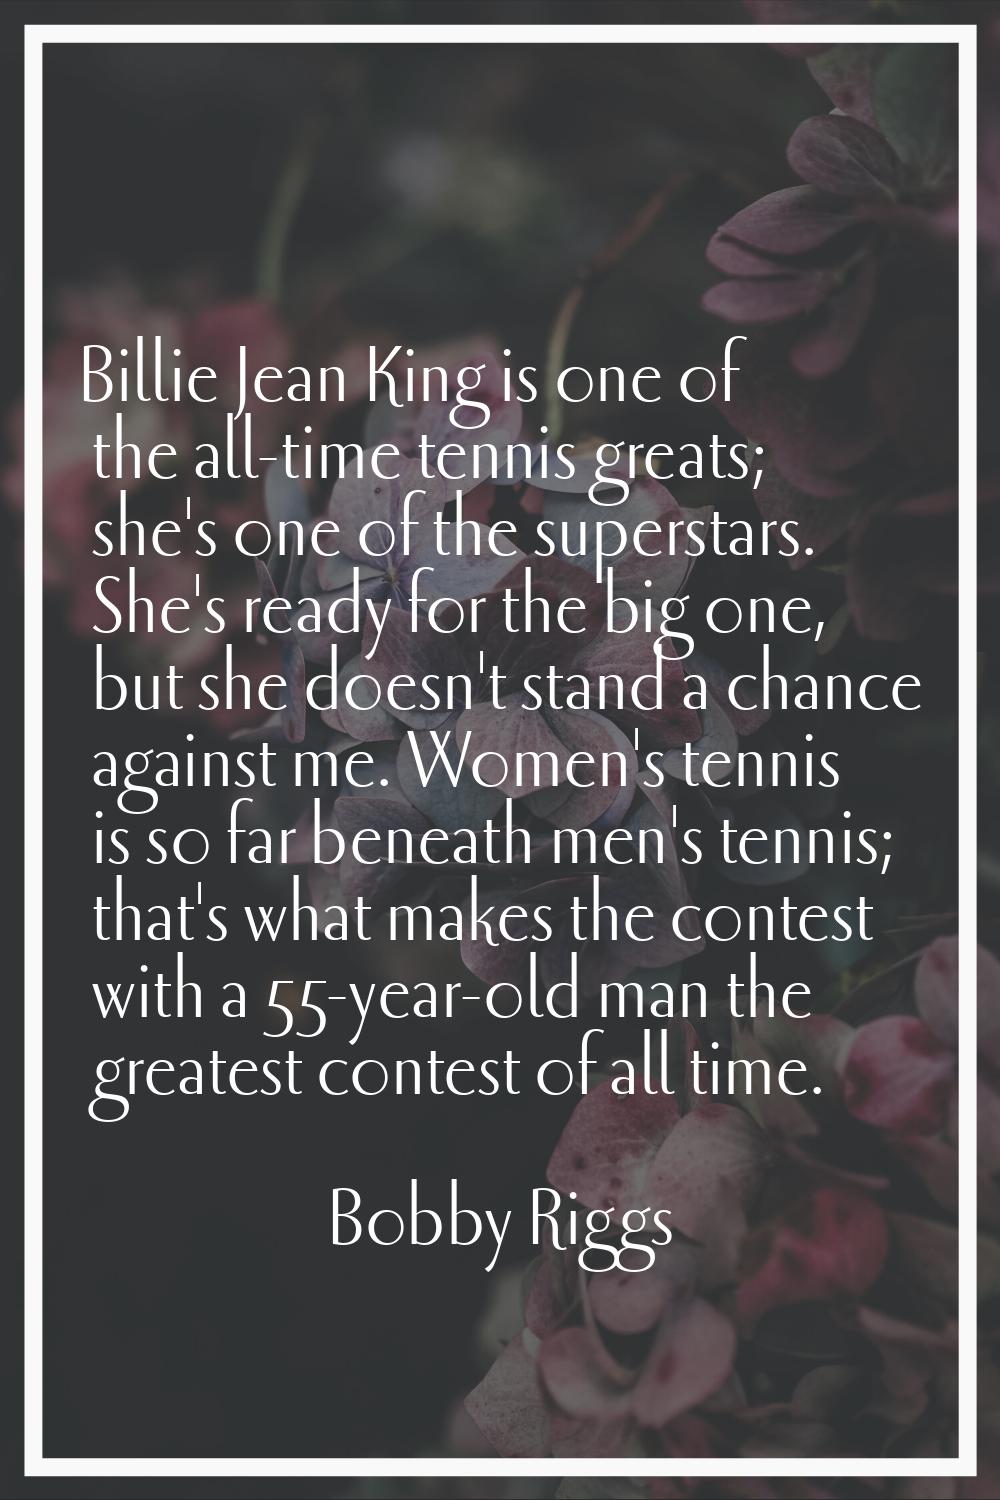 Billie Jean King is one of the all-time tennis greats; she's one of the superstars. She's ready for